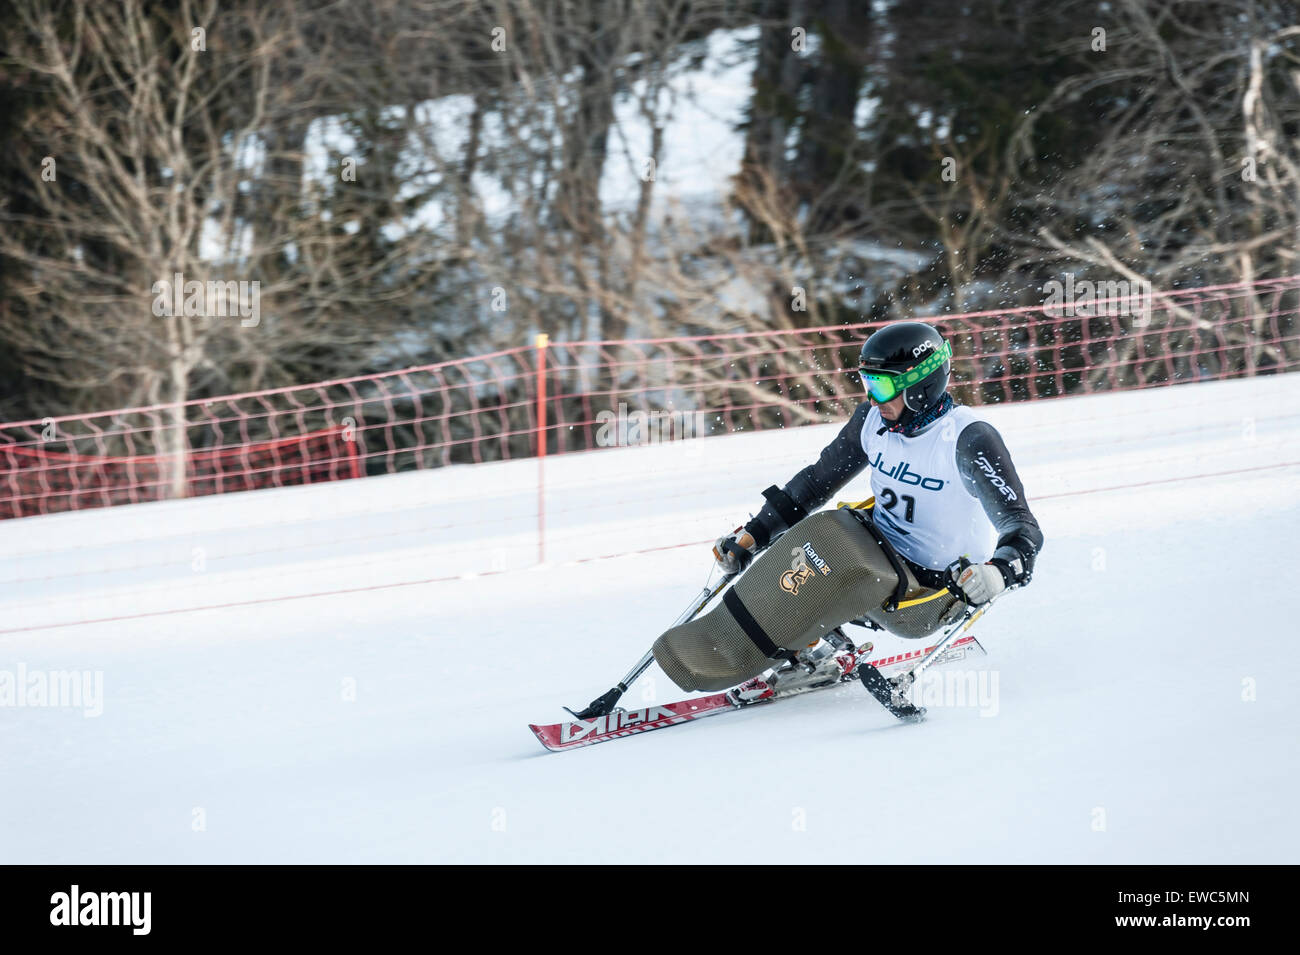 A disabled competitor using specially-adapted ski equipment, racing downhill in a giant slalom race Stock Photo